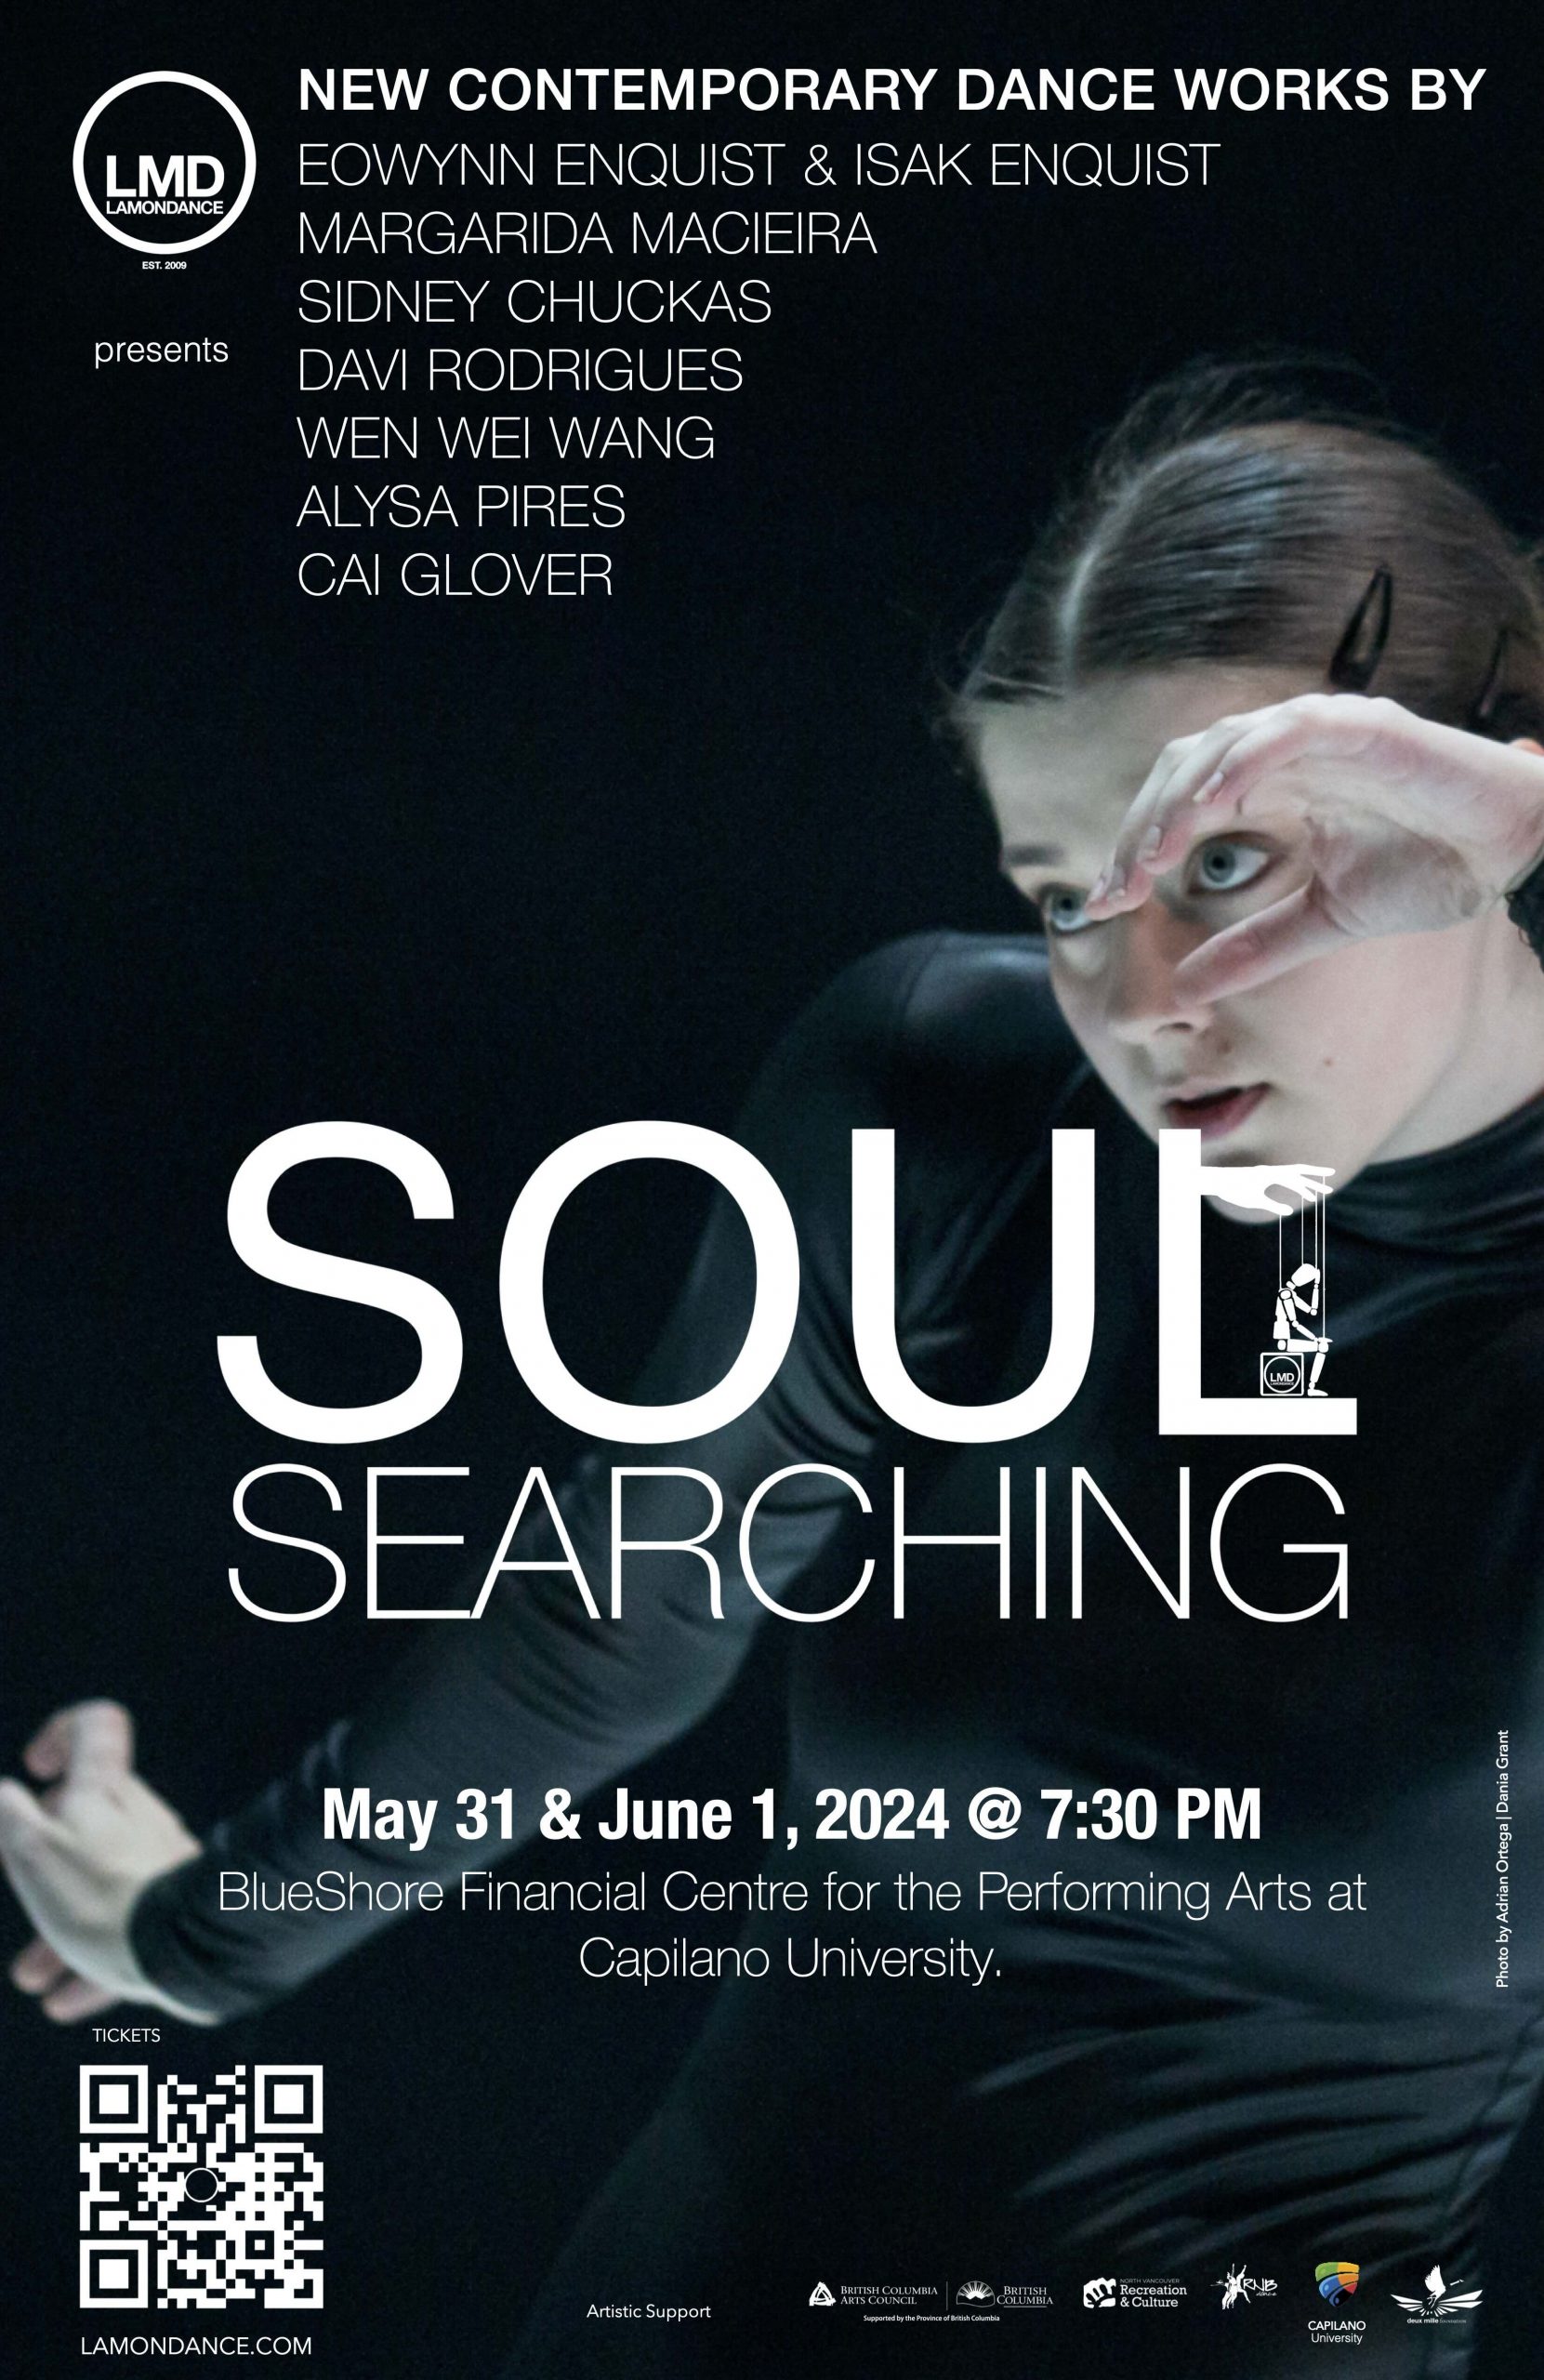 Poster from Lamondance event Soul Searching. A dance artist wearing all black poses with one hand in front of their eye and the other extended outwards. There is a QR code, donor logos and text about the artists performing present on the poster